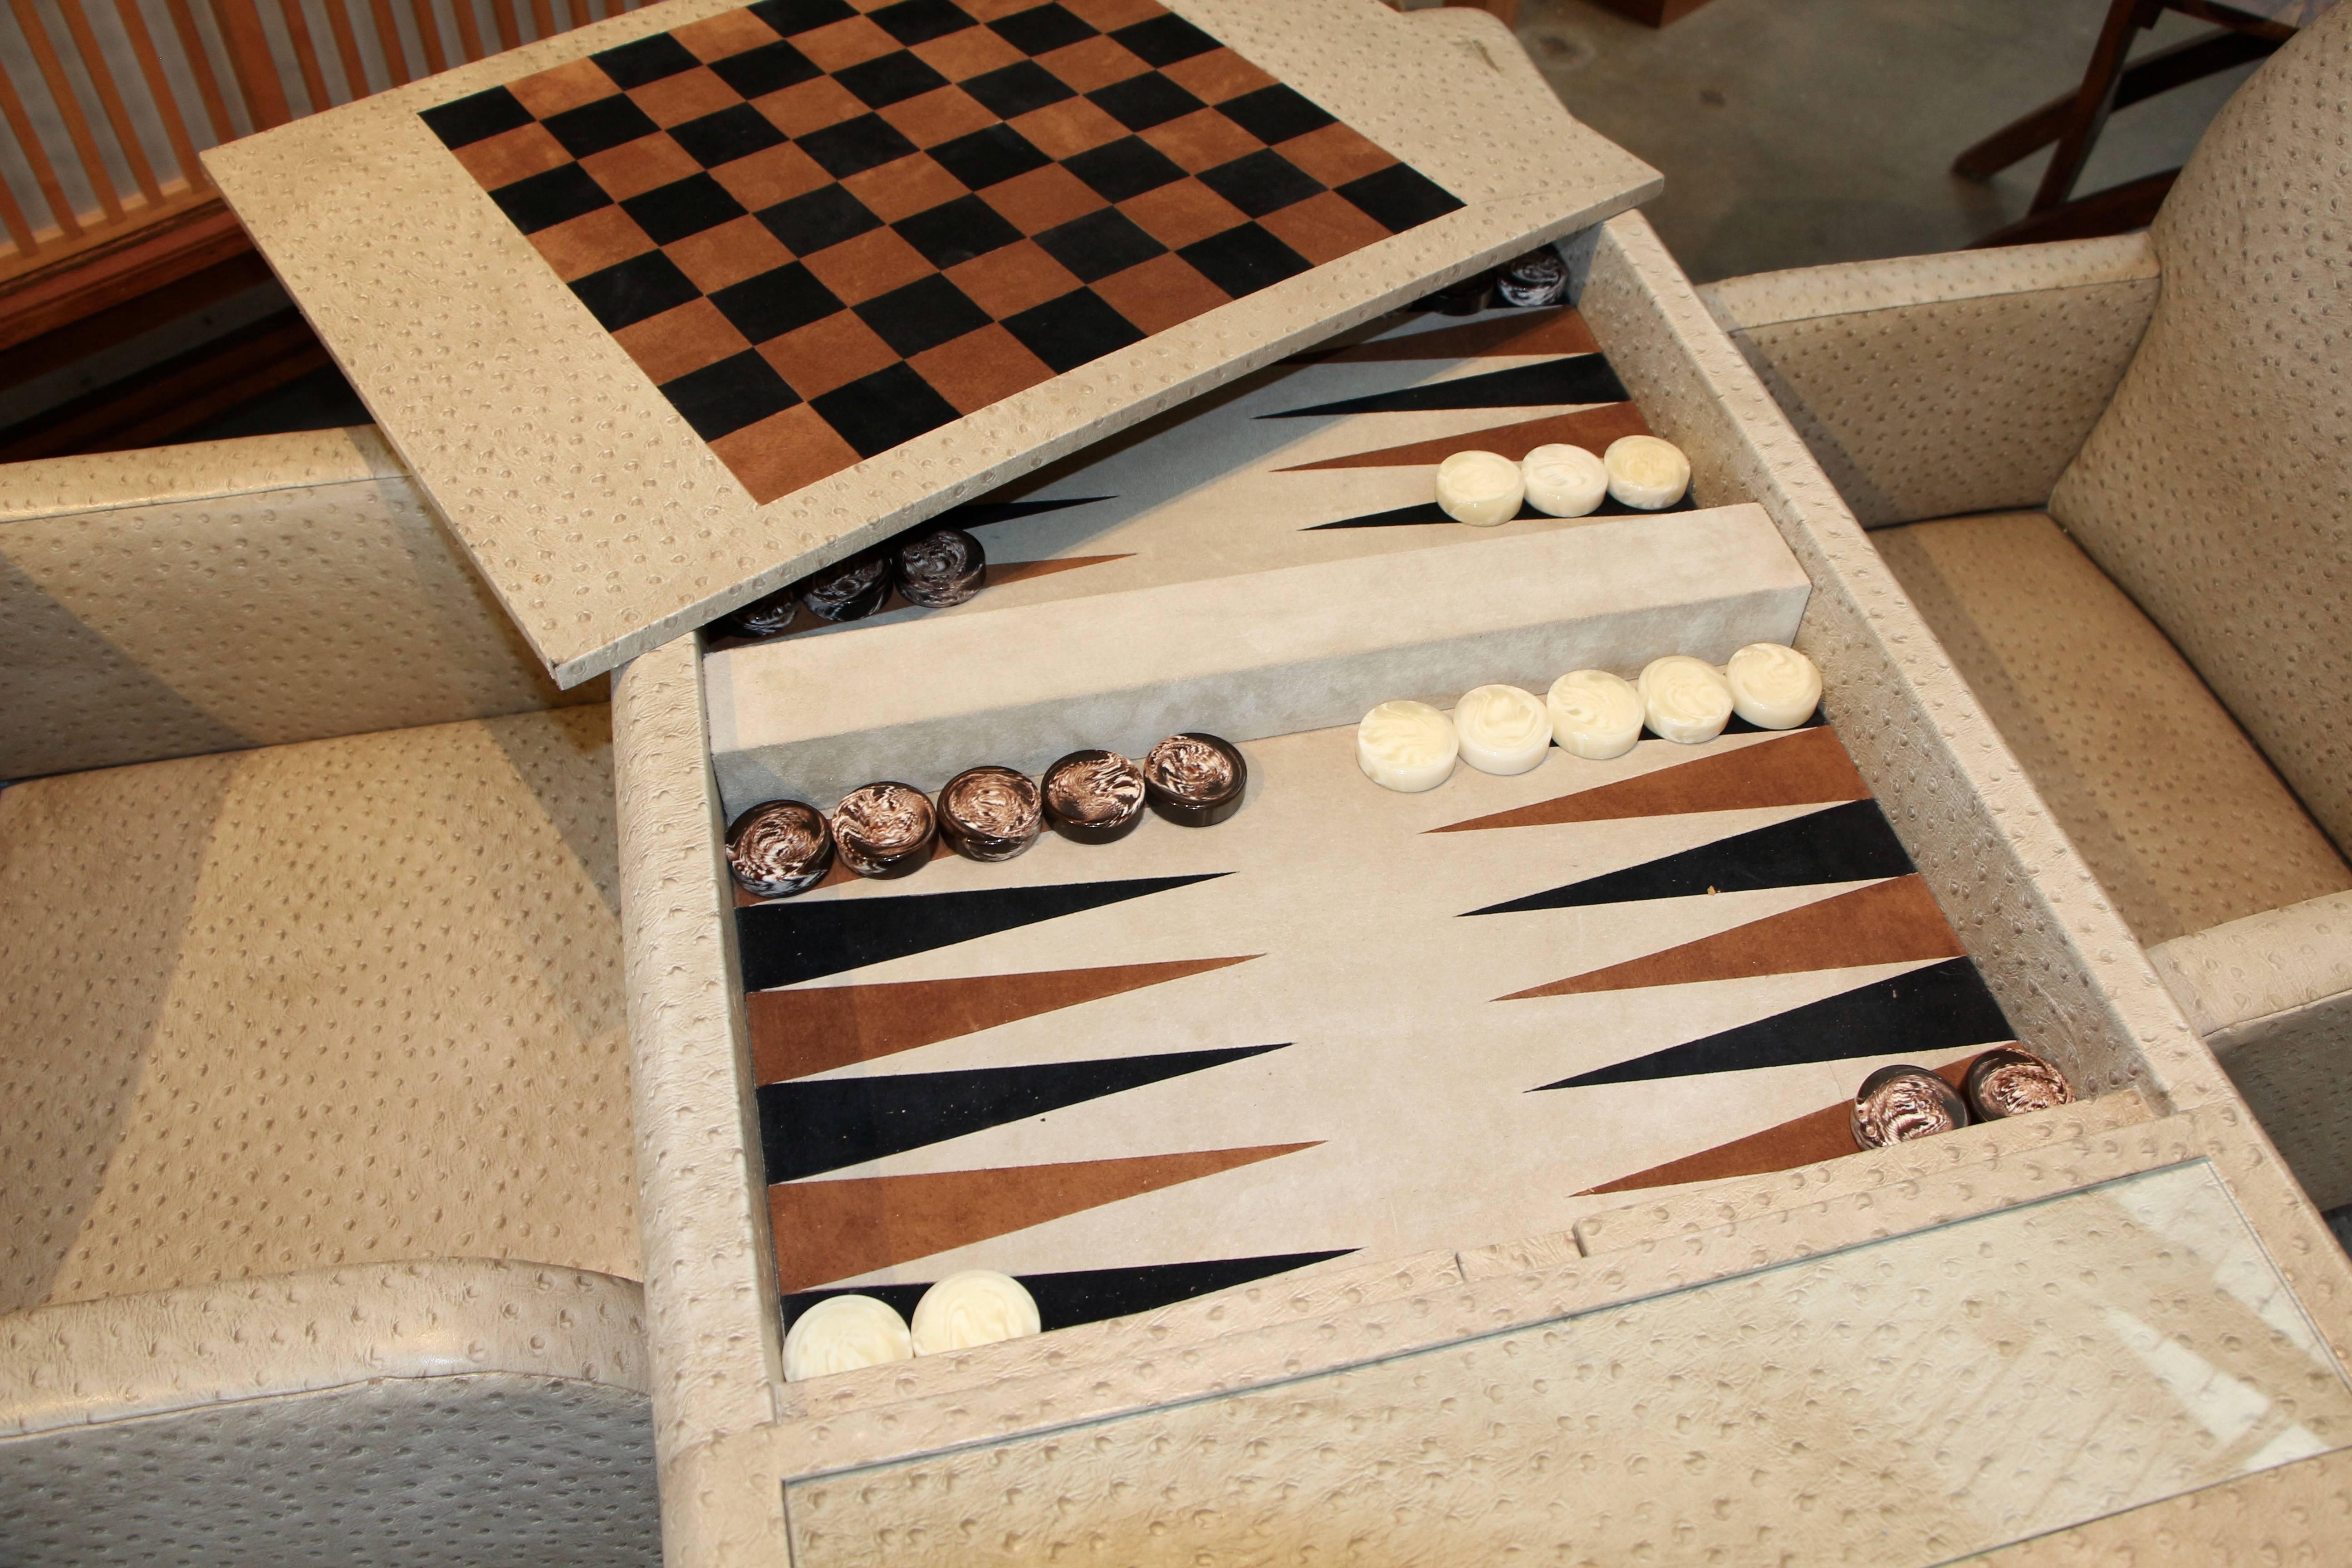 A nice faux ostrich covered game table with matching chairs. We believe the material to be faux ostrich vinyl. The top flips over to reveal a chess board and below in the well is a backgammon board with pieces. The top is lifted up by a clever